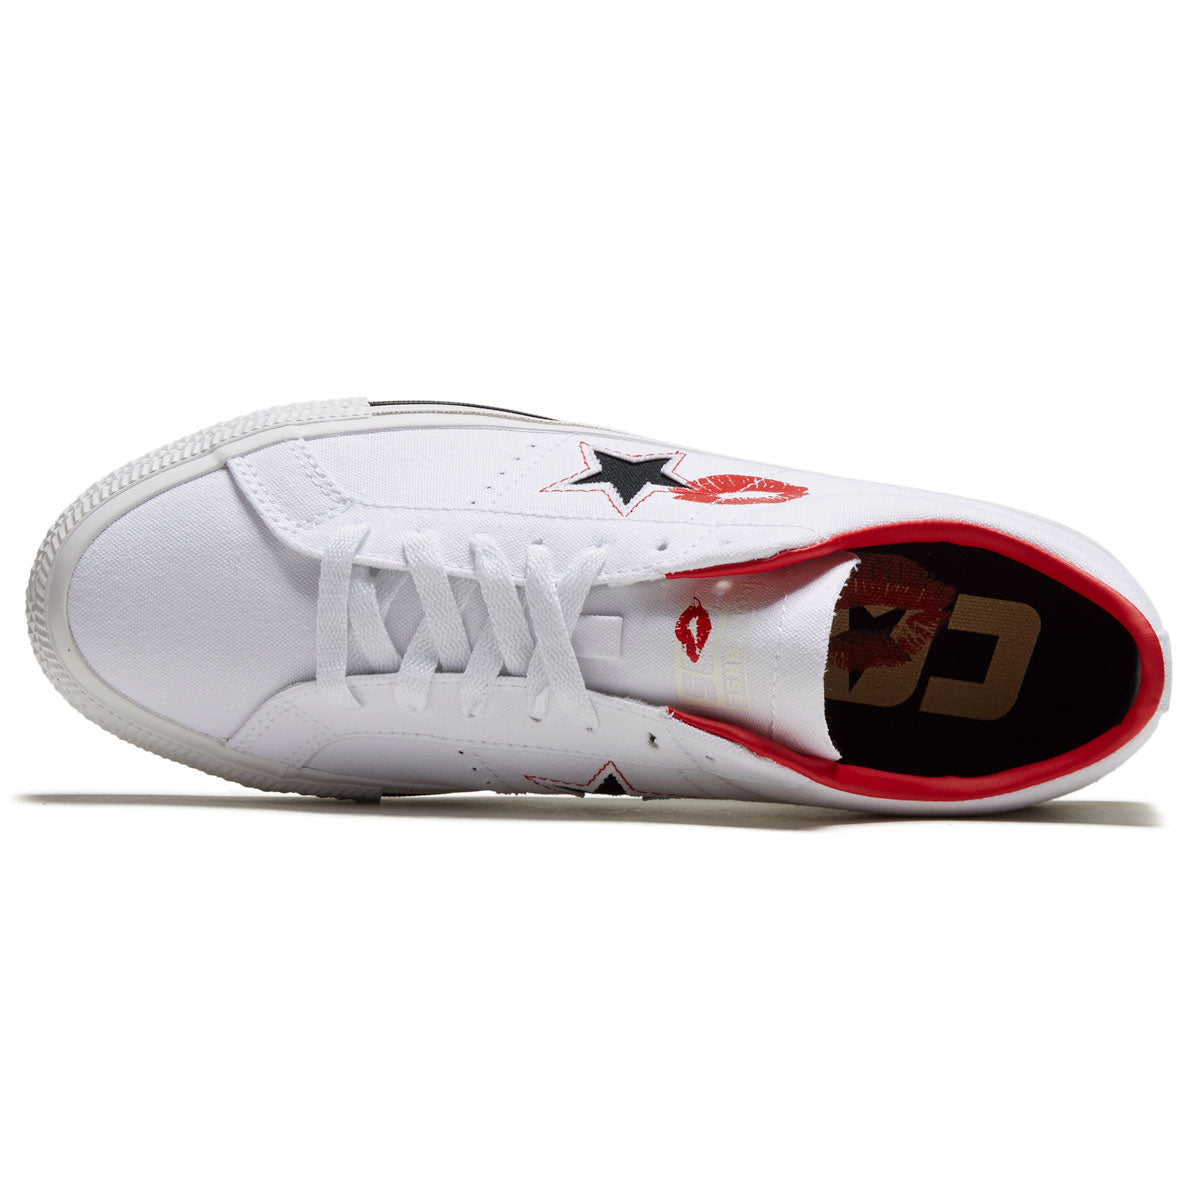 Converse One Star Pro Lips Shoes - White/Black/Red image 3